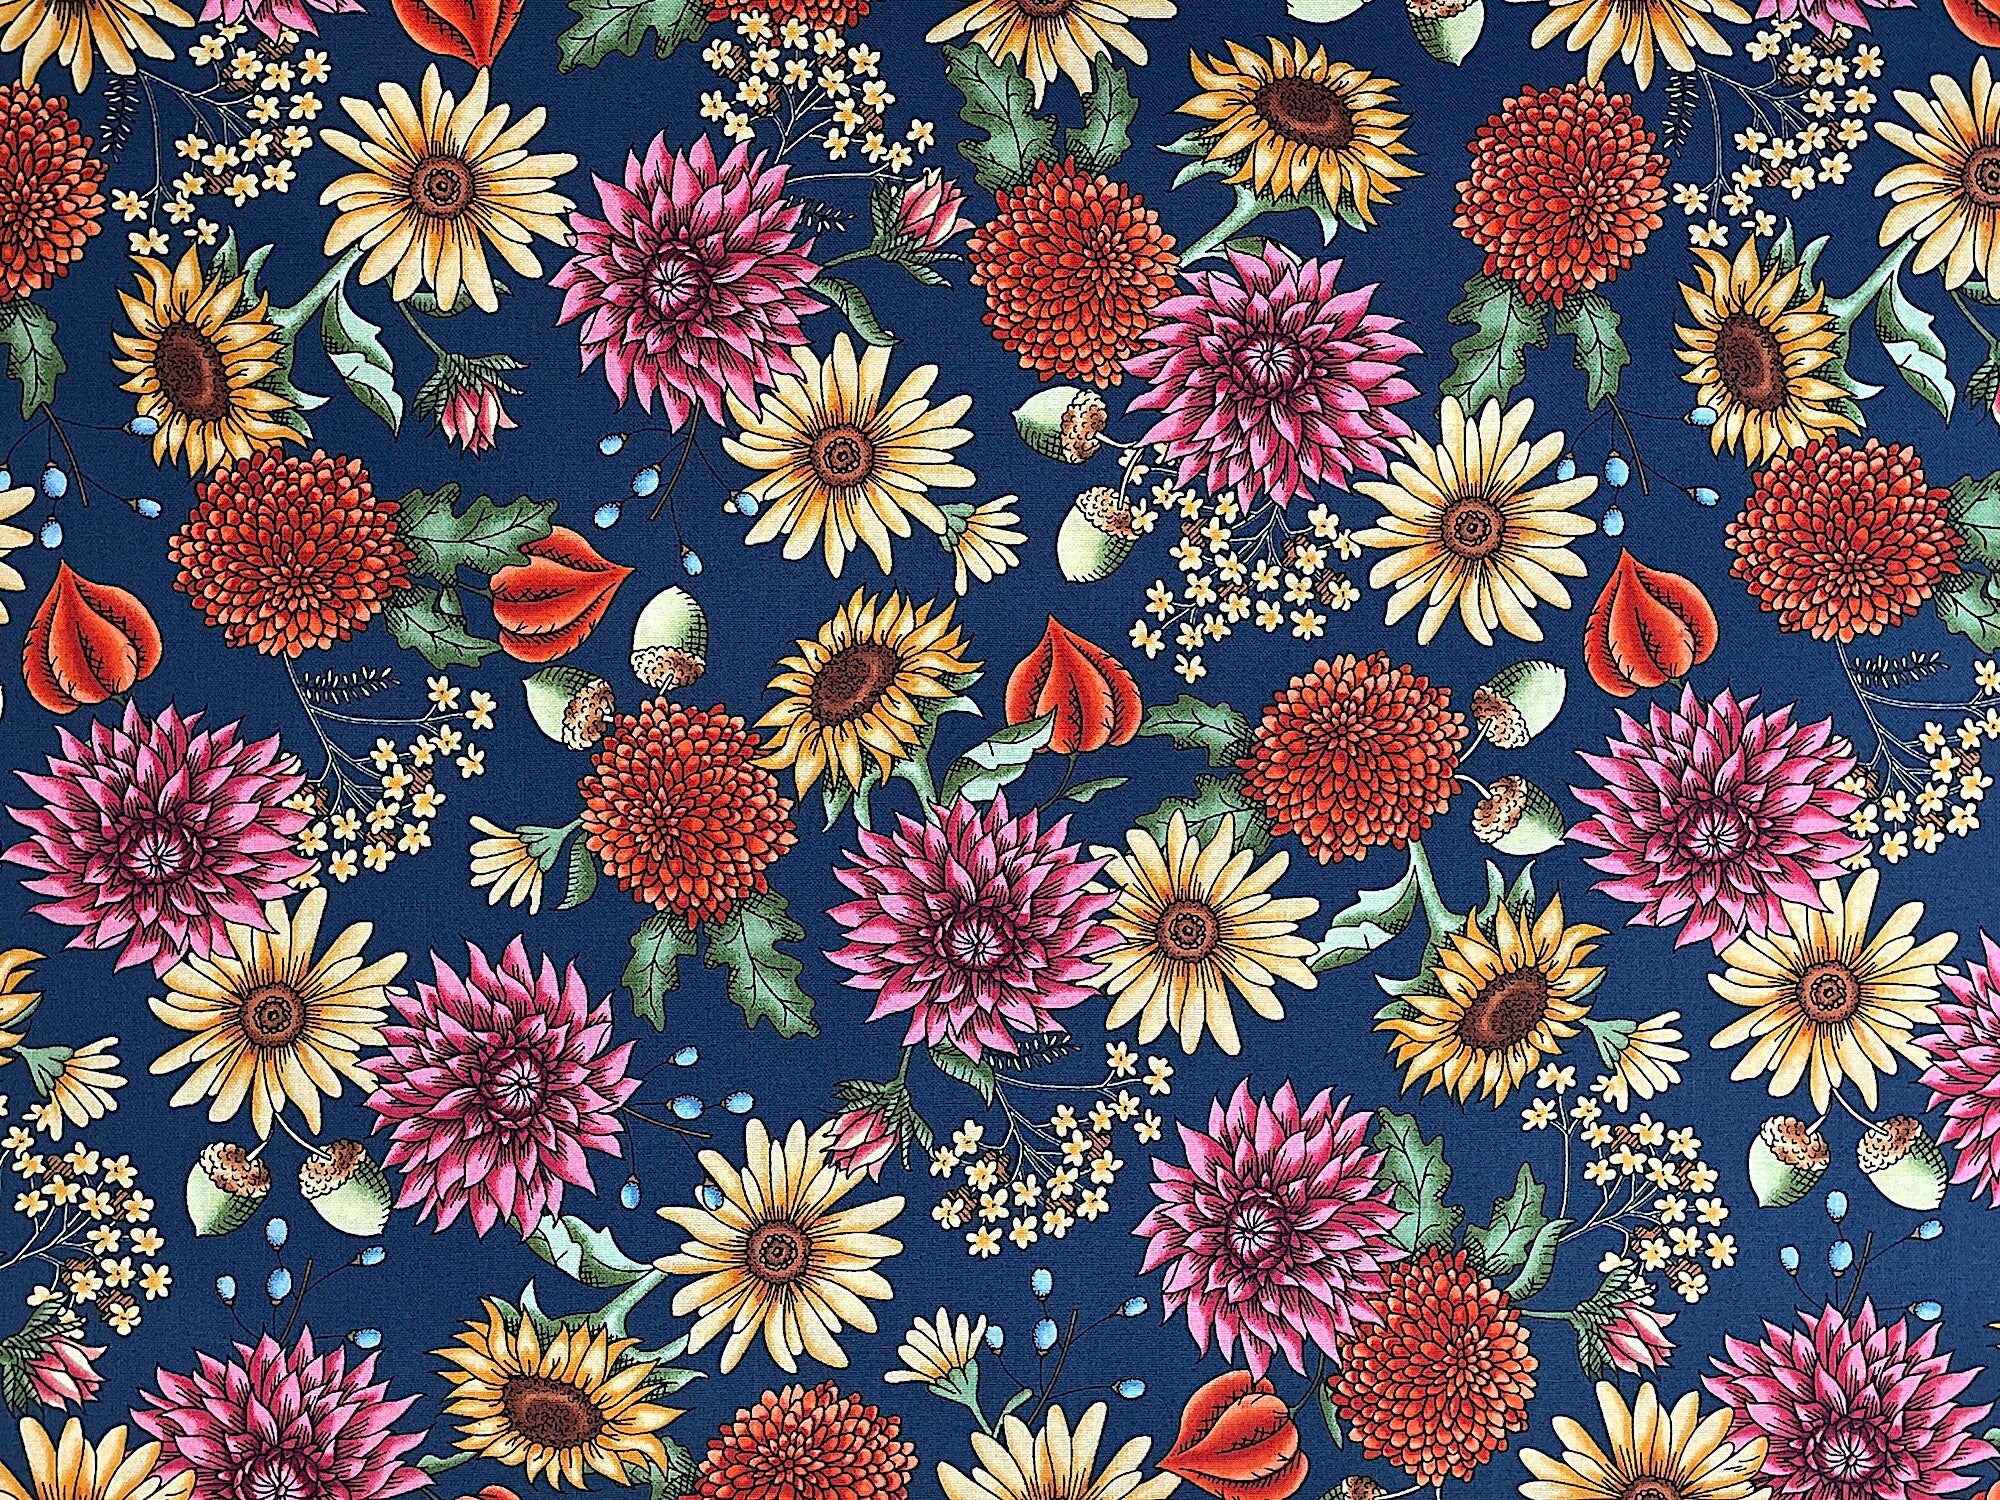 This dark navy blue fabric is covered with flowers. The flowers are yellow, pink, orange and blue.